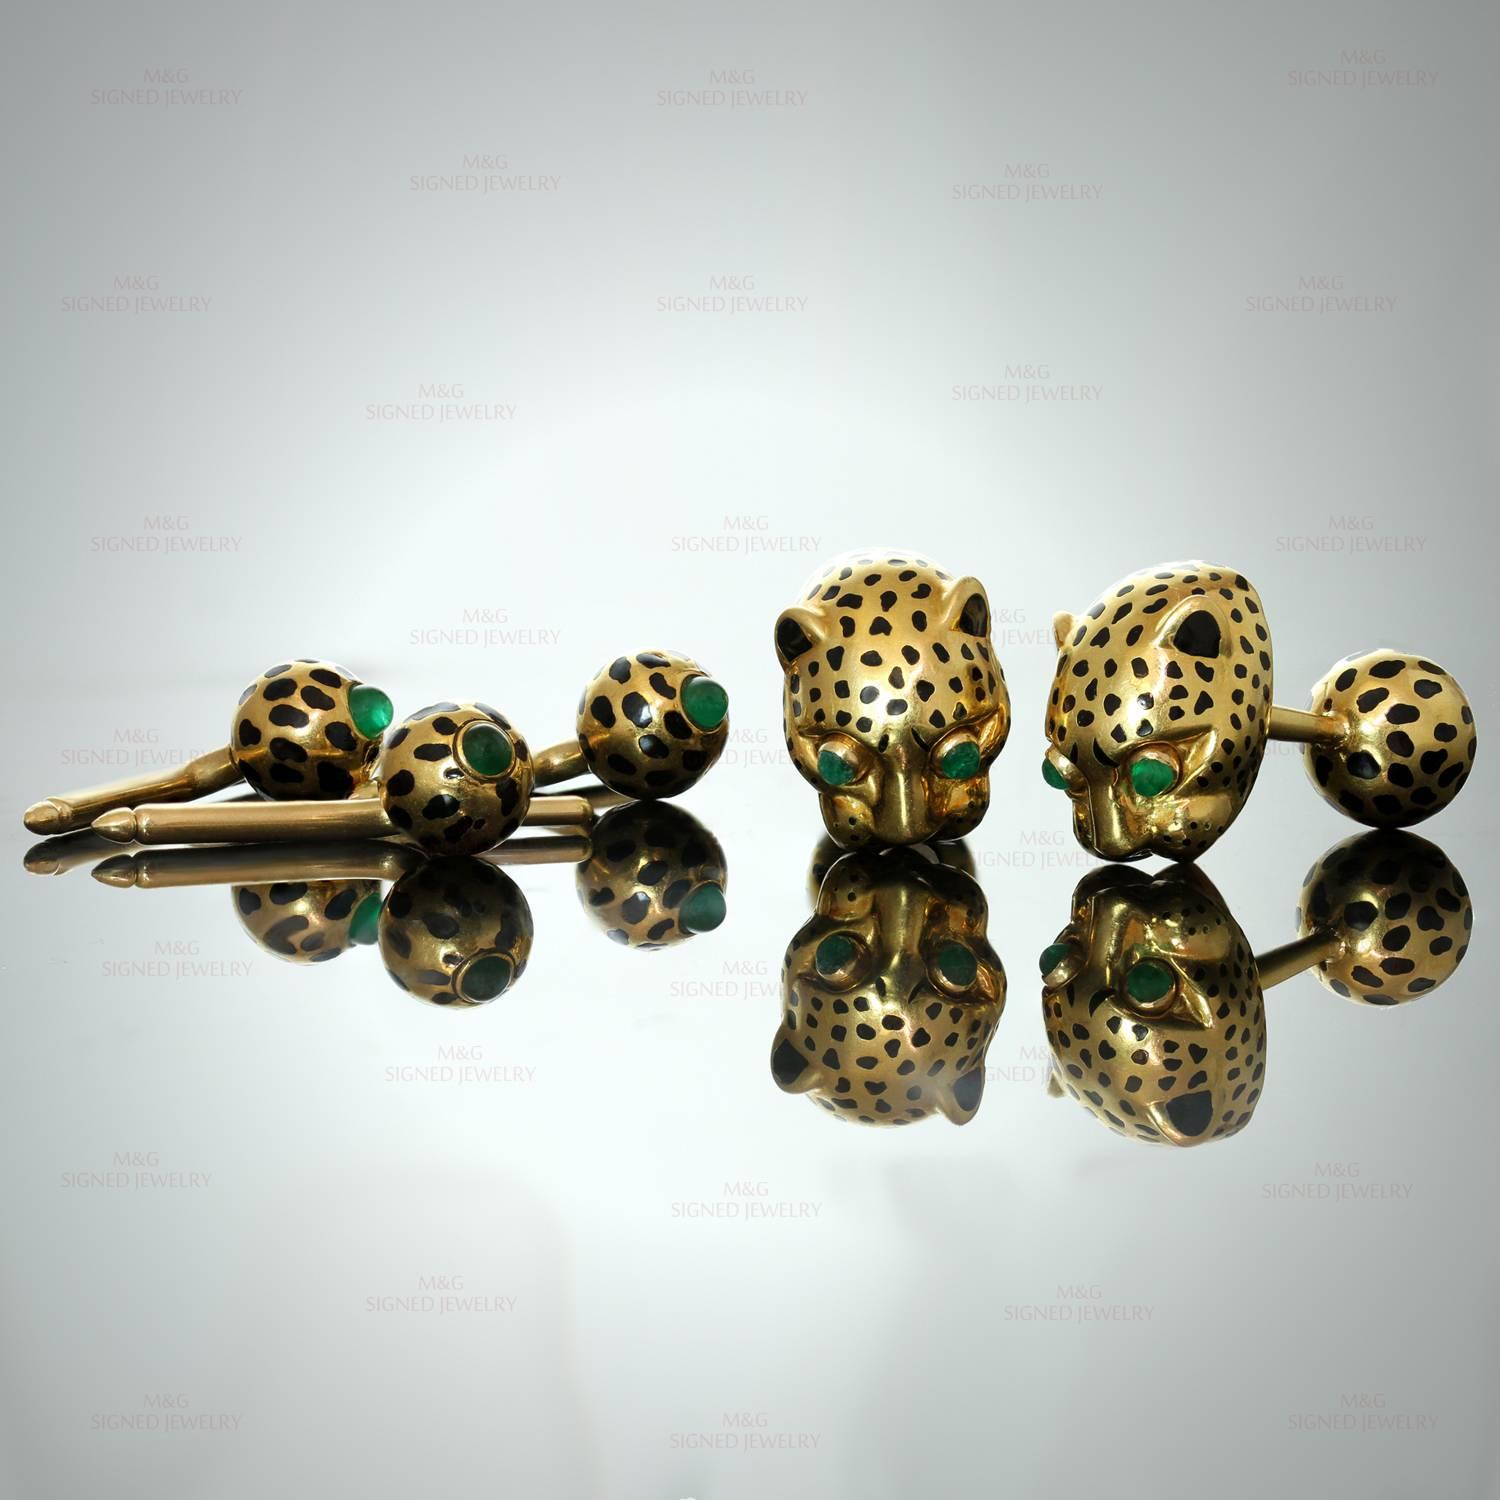 This chic and handsome David Webb gentleman's dress set features a pair of leopard head cufflinks and three shird studs accented with cabochon emeralds and black enamel. The shirt studs have 14k yellow gold findings while the rest of the set is